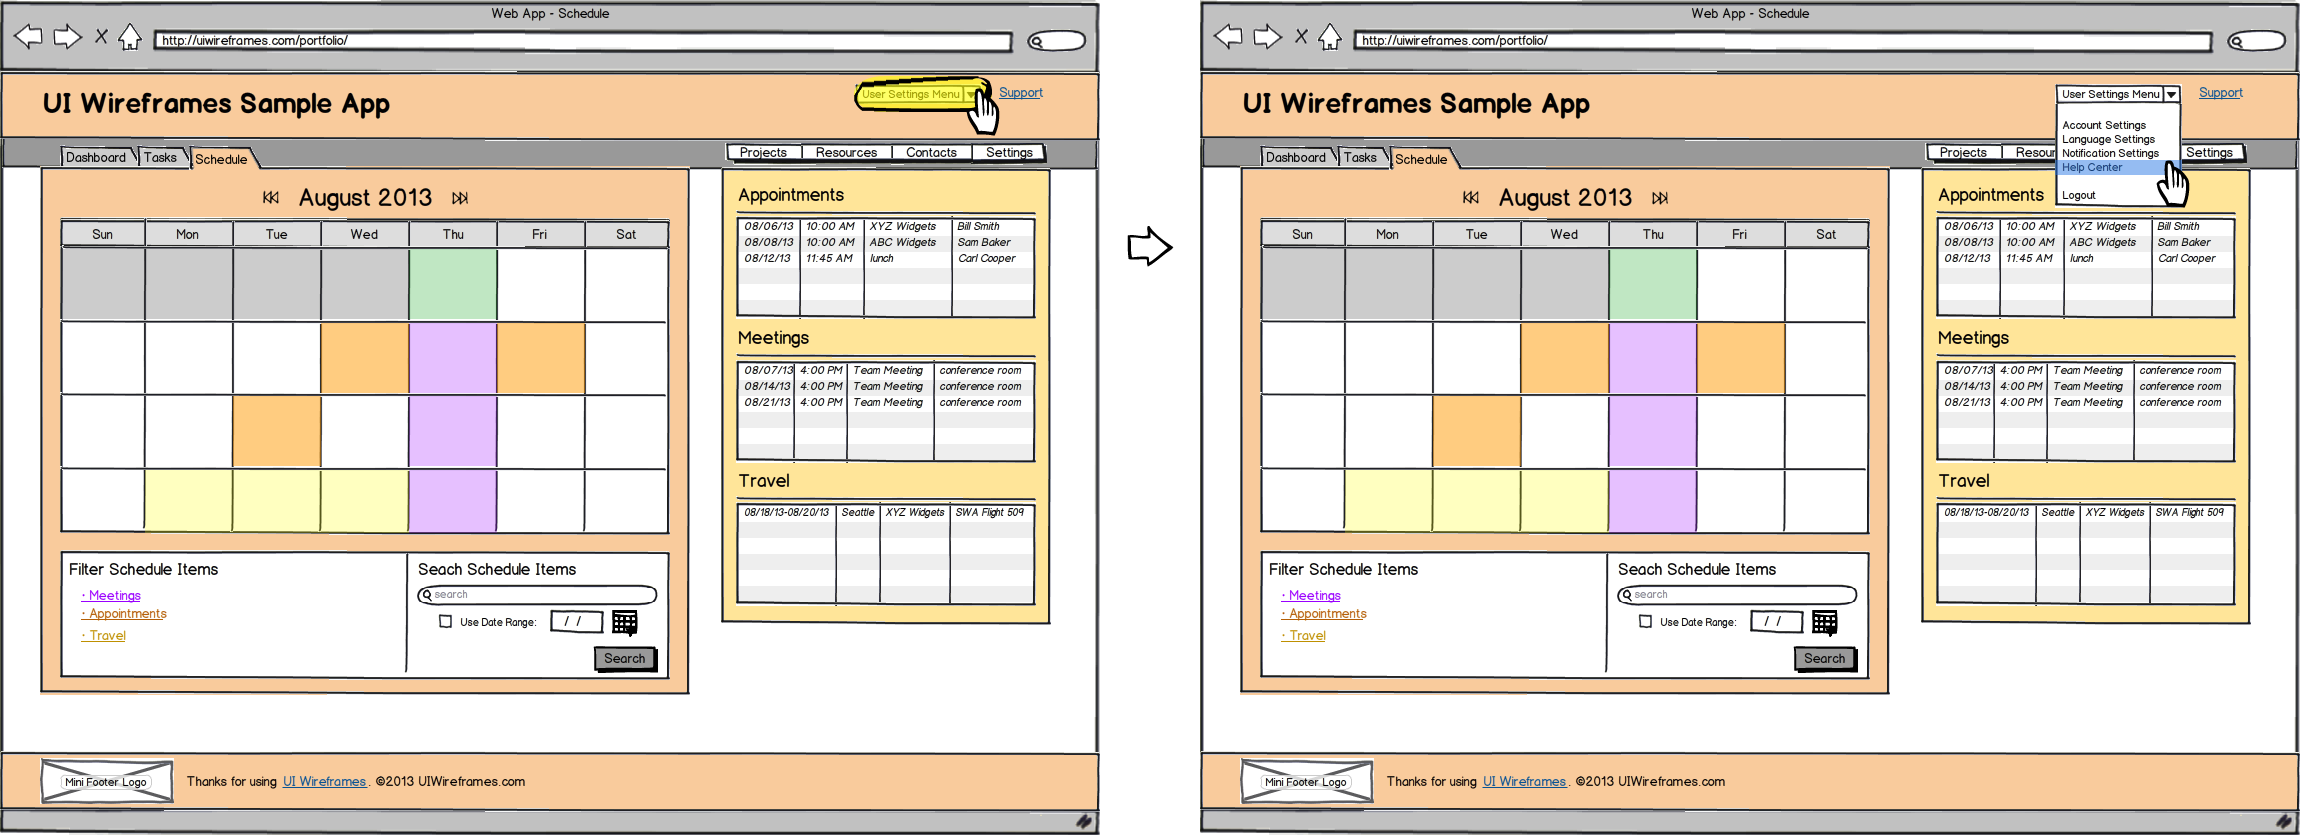 Web App Wireframe Sample - UI Wireframes Interaction Package